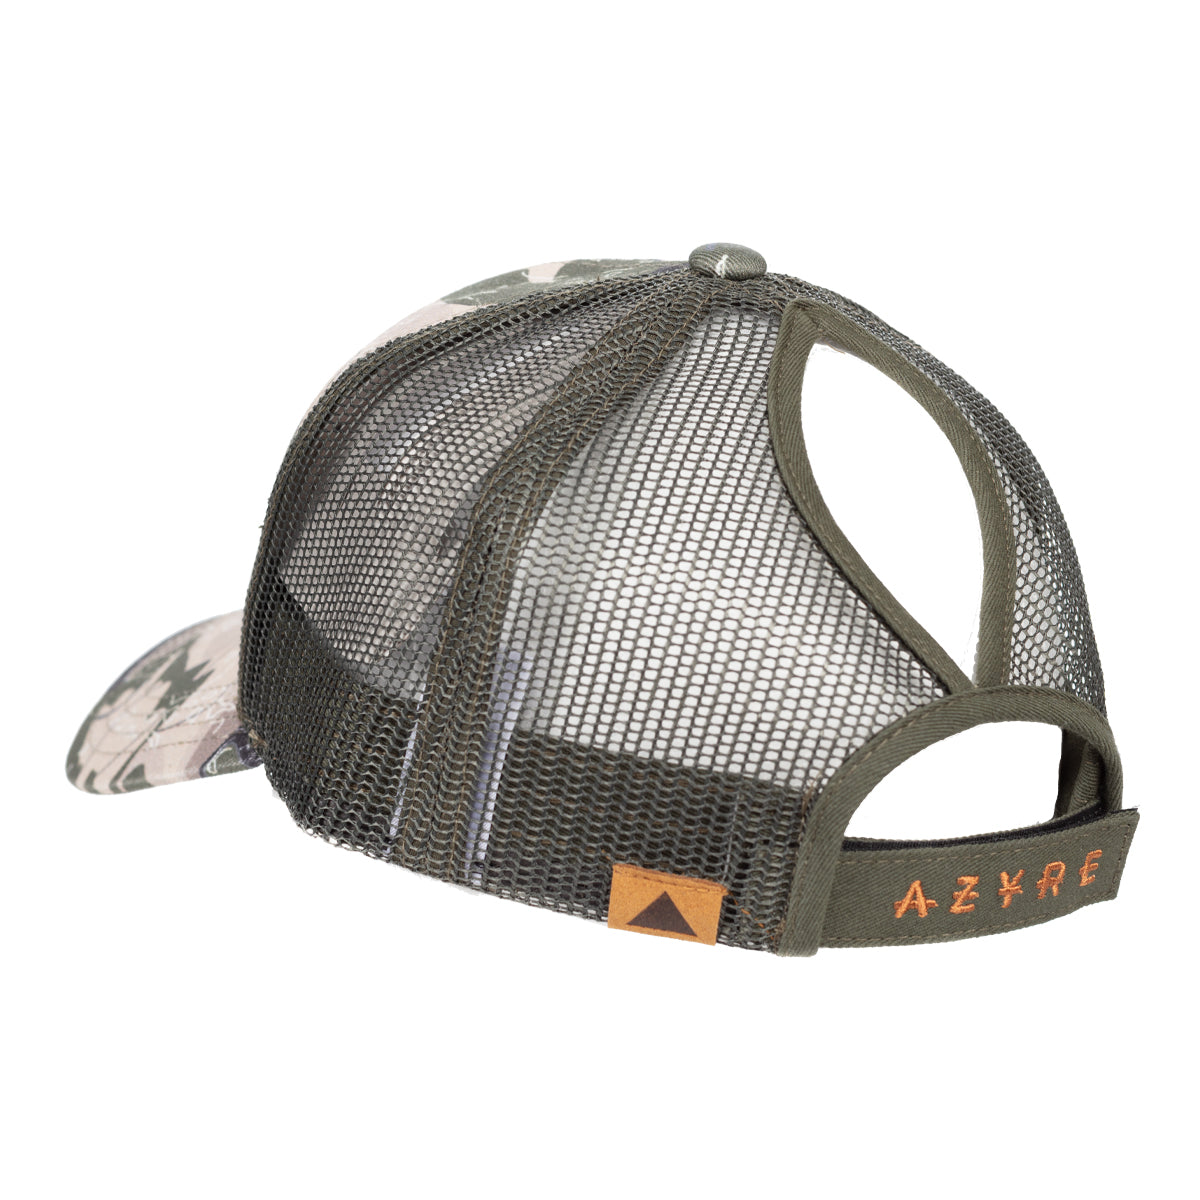 Azyre Ponytail Hat in  by GOHUNT | Azyre - GOHUNT Shop